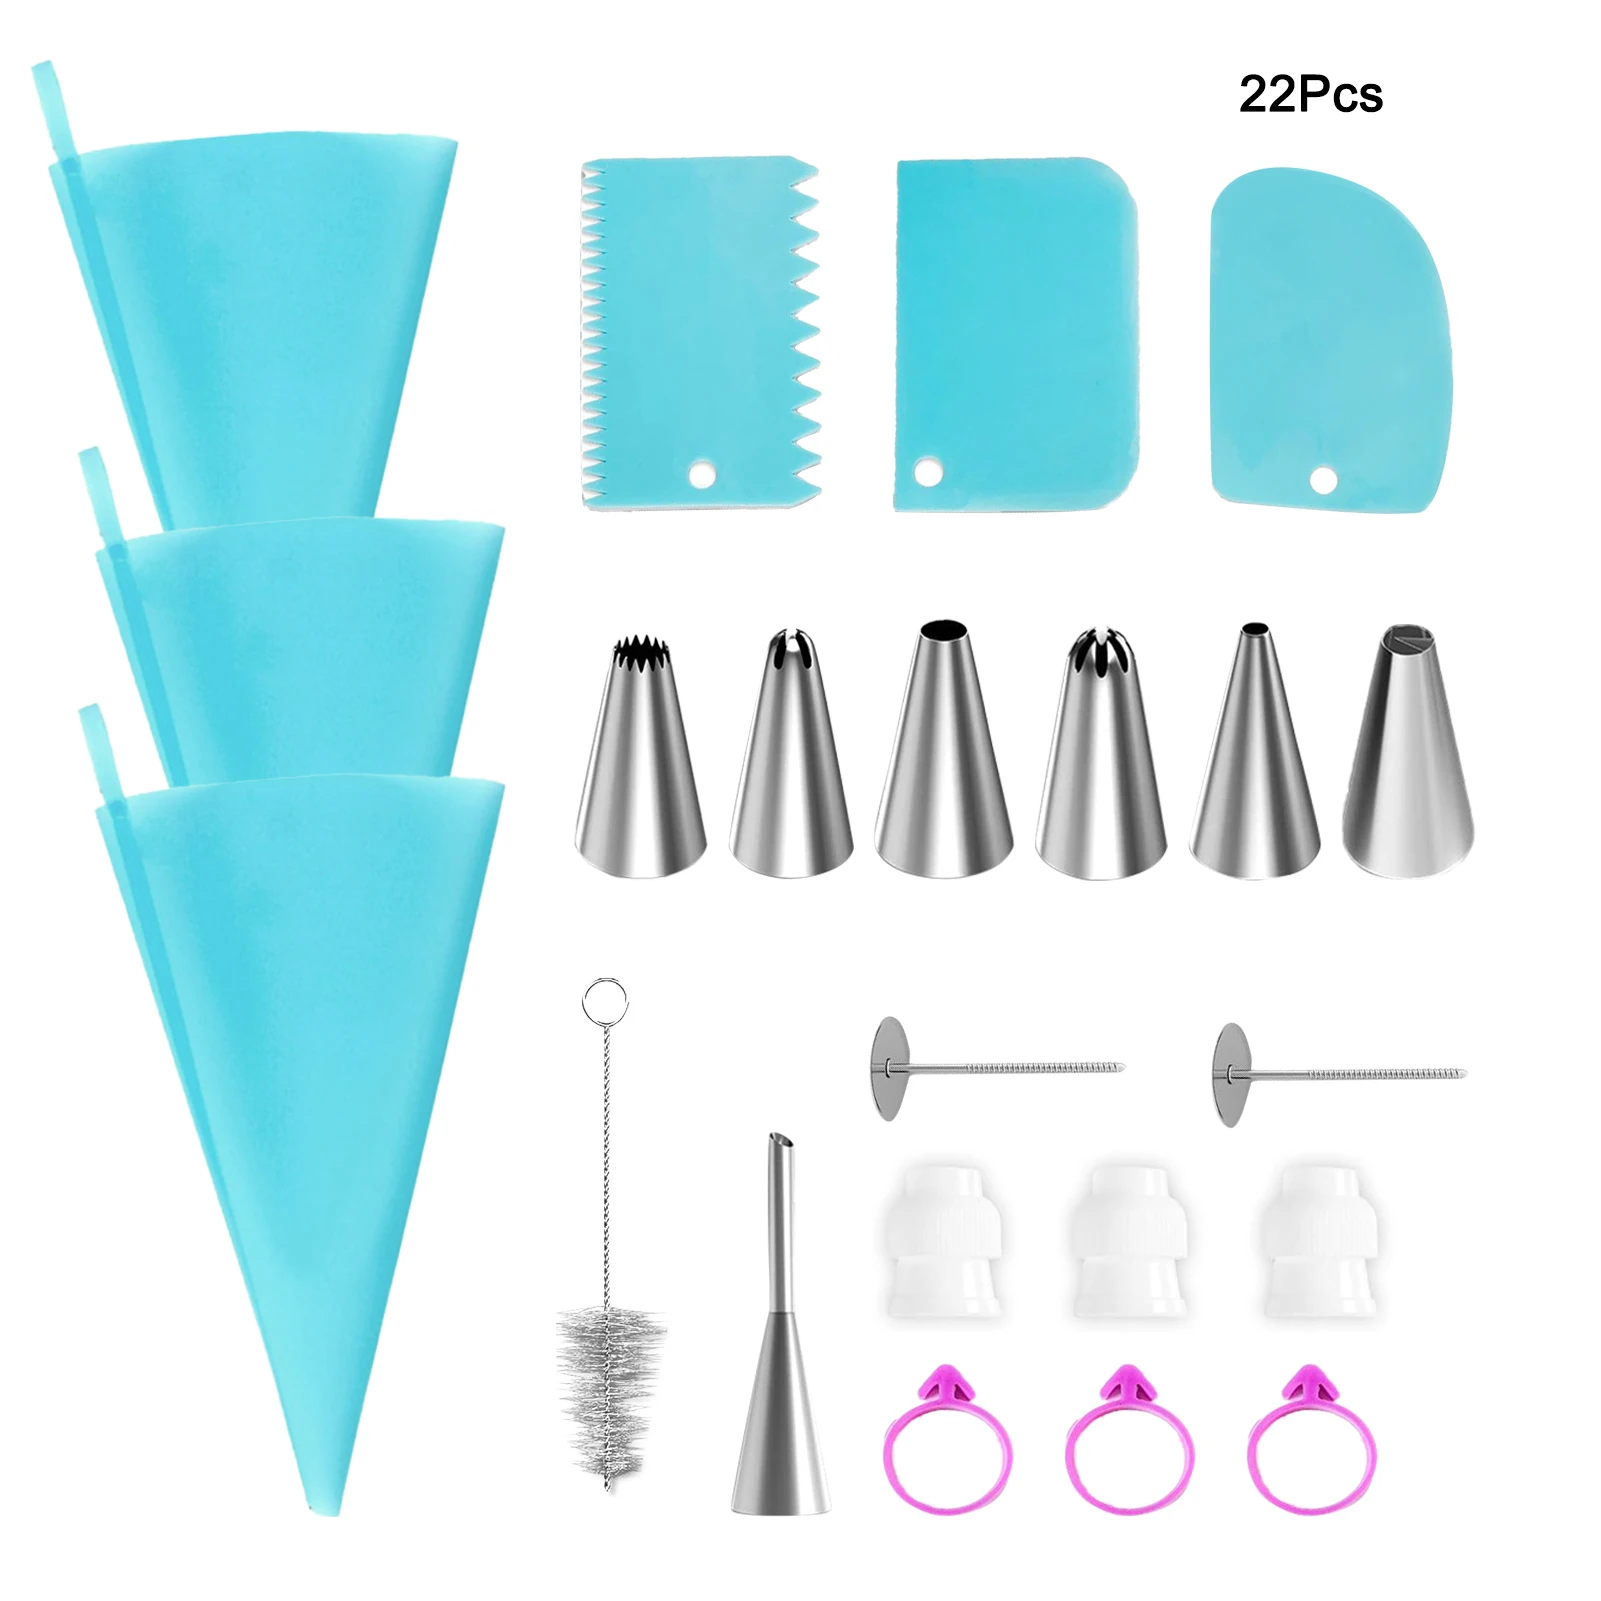 

Stainless Steel Cake Decorating Supplies Kit Kitchen Cleaning Brush Piping Bags Cookies Baking Tool Reusable Icing Tip Scraper